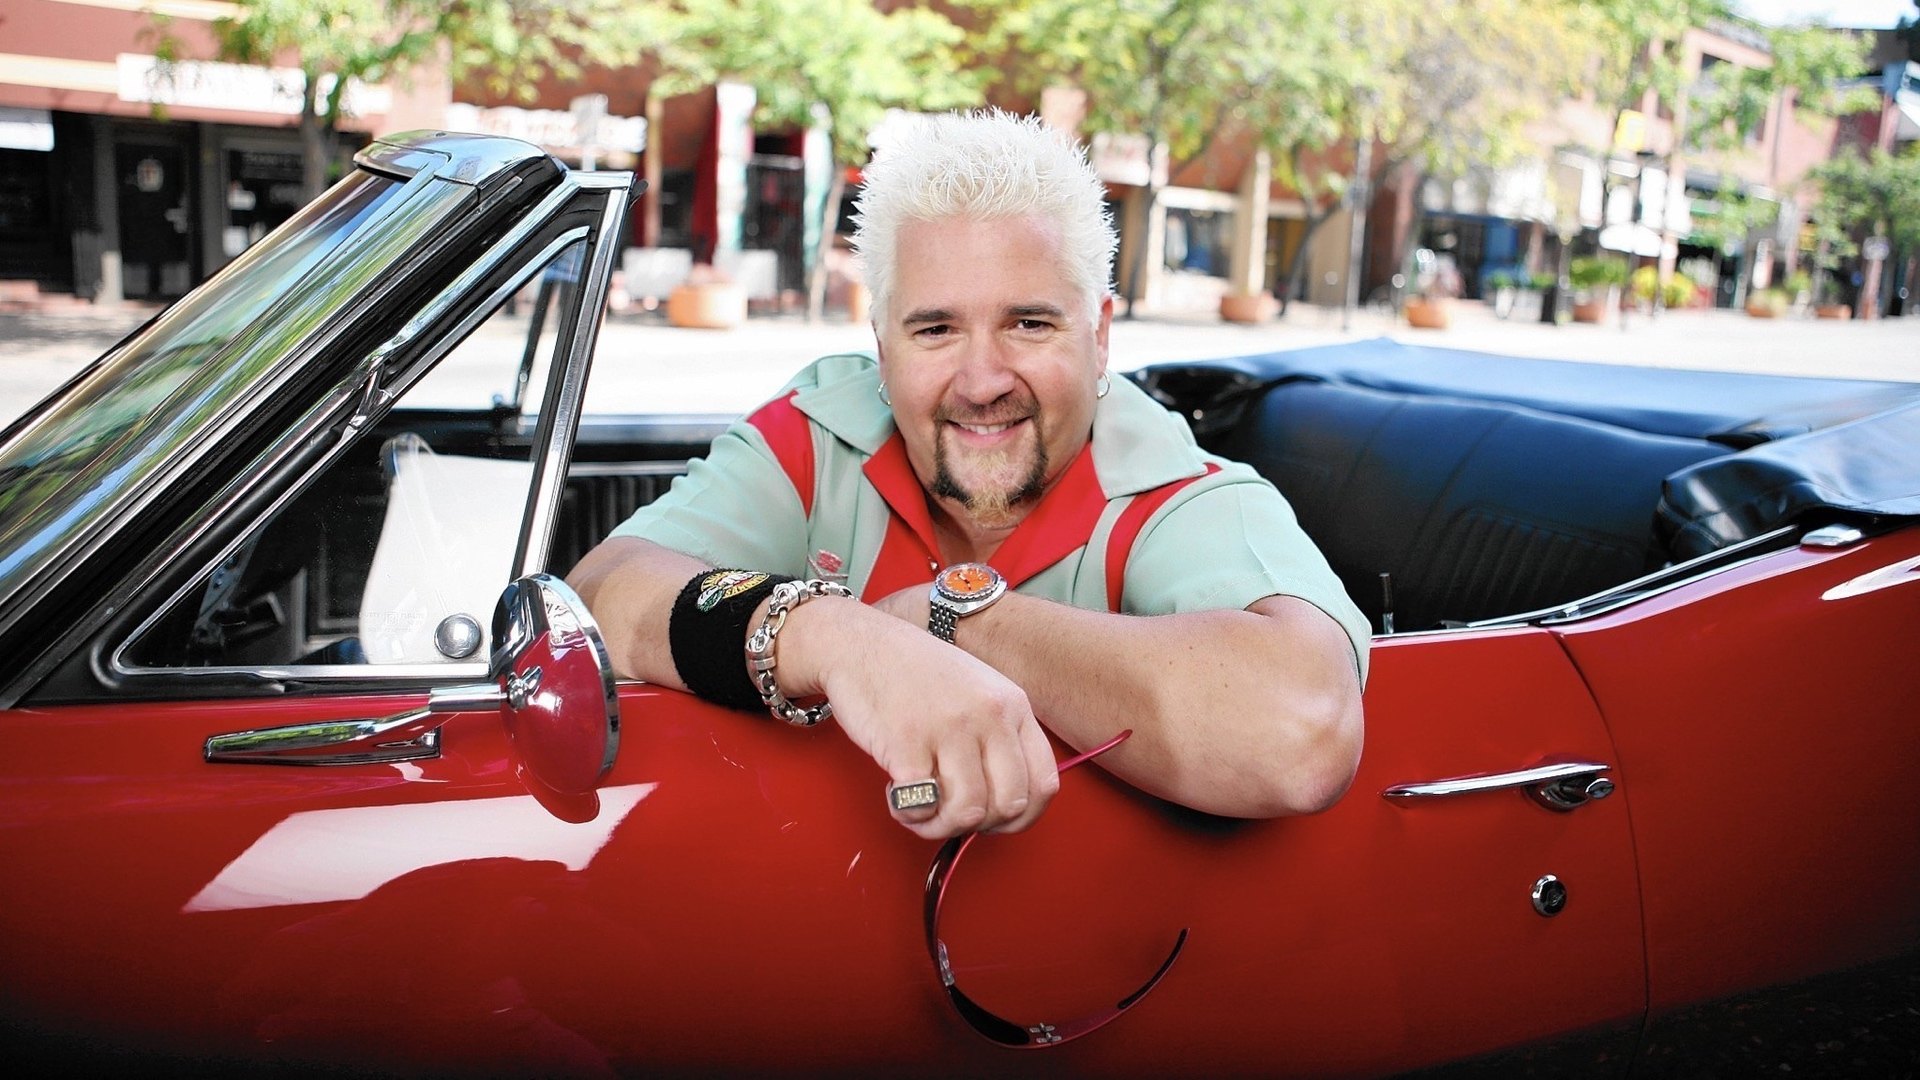 Diners, Driveins and Dives episodes (TV Series 2006 Now)